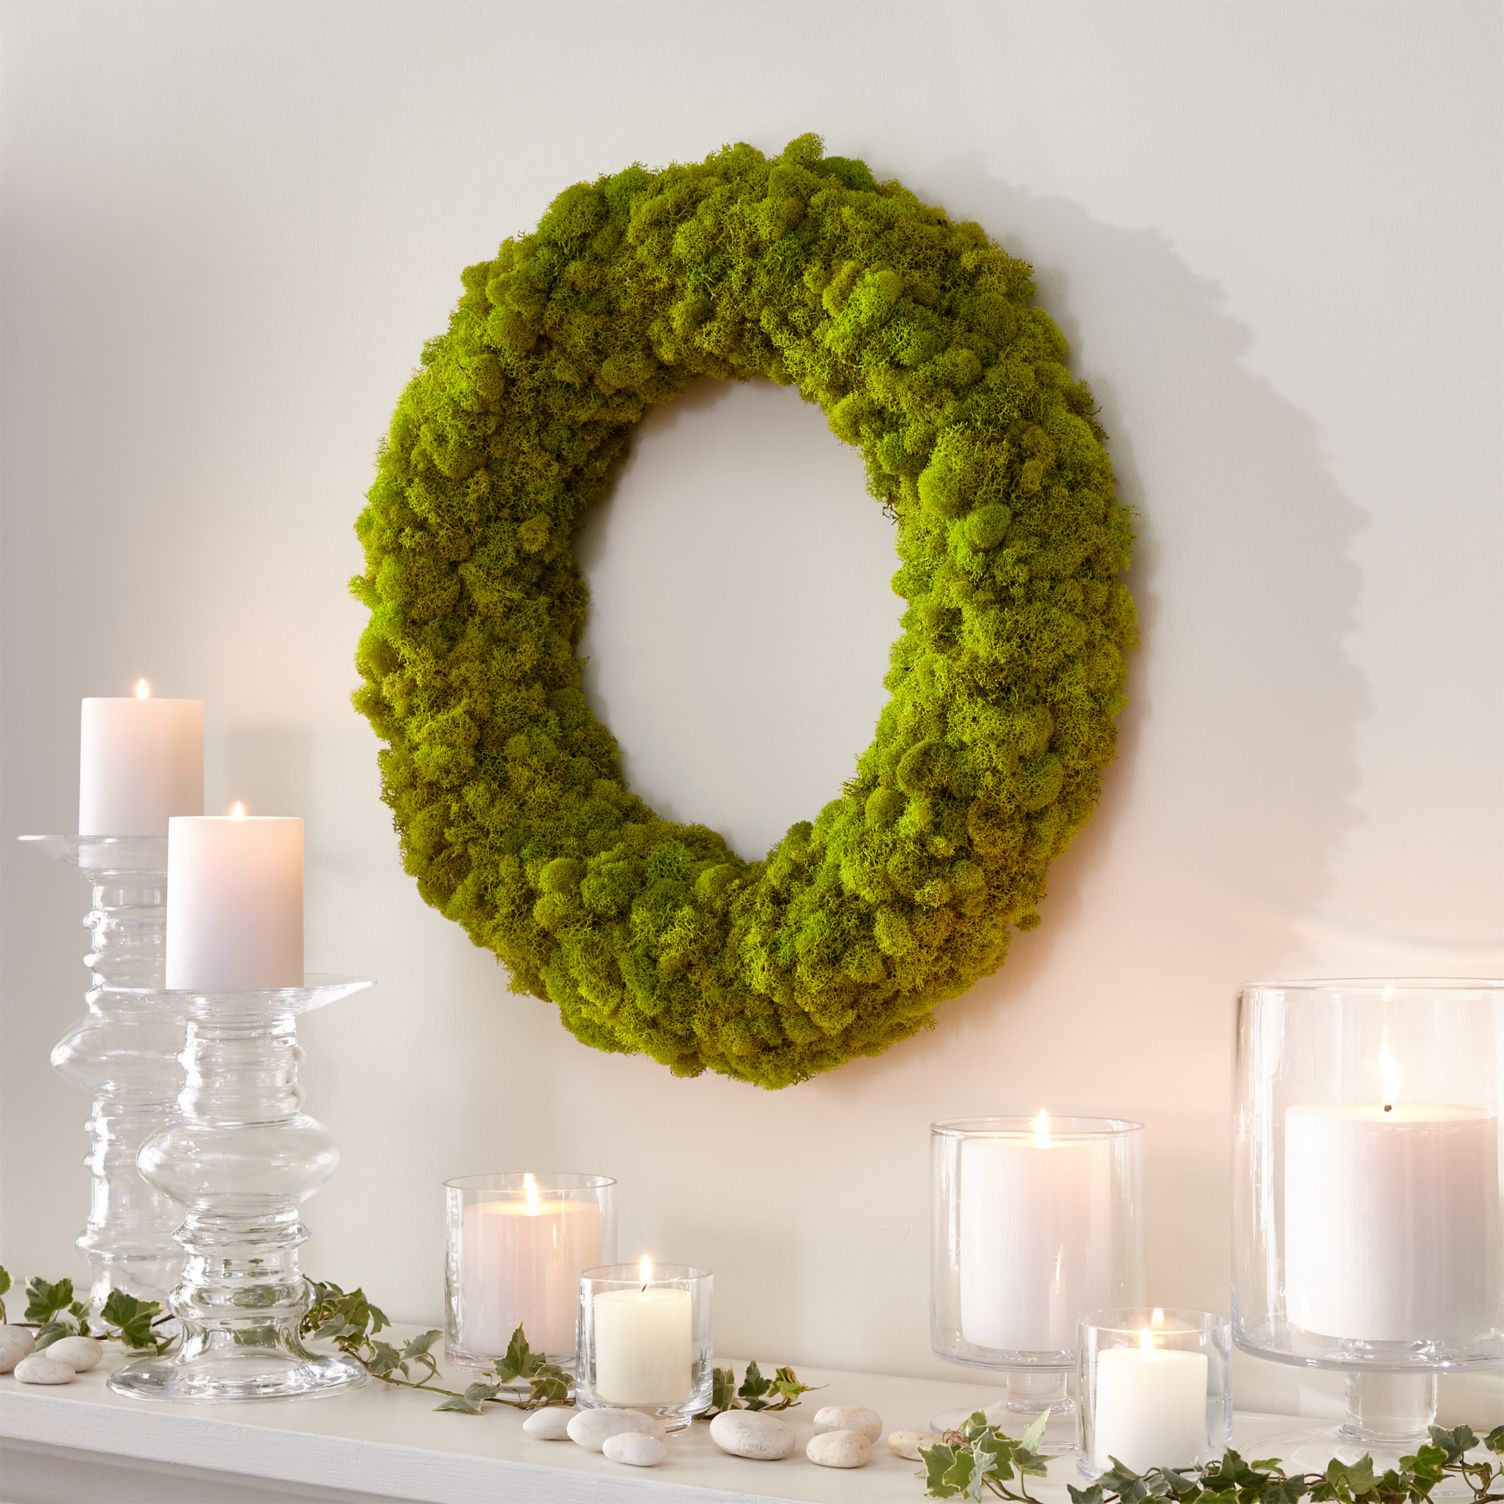 Moss-wreath-from-Crate-Barrel